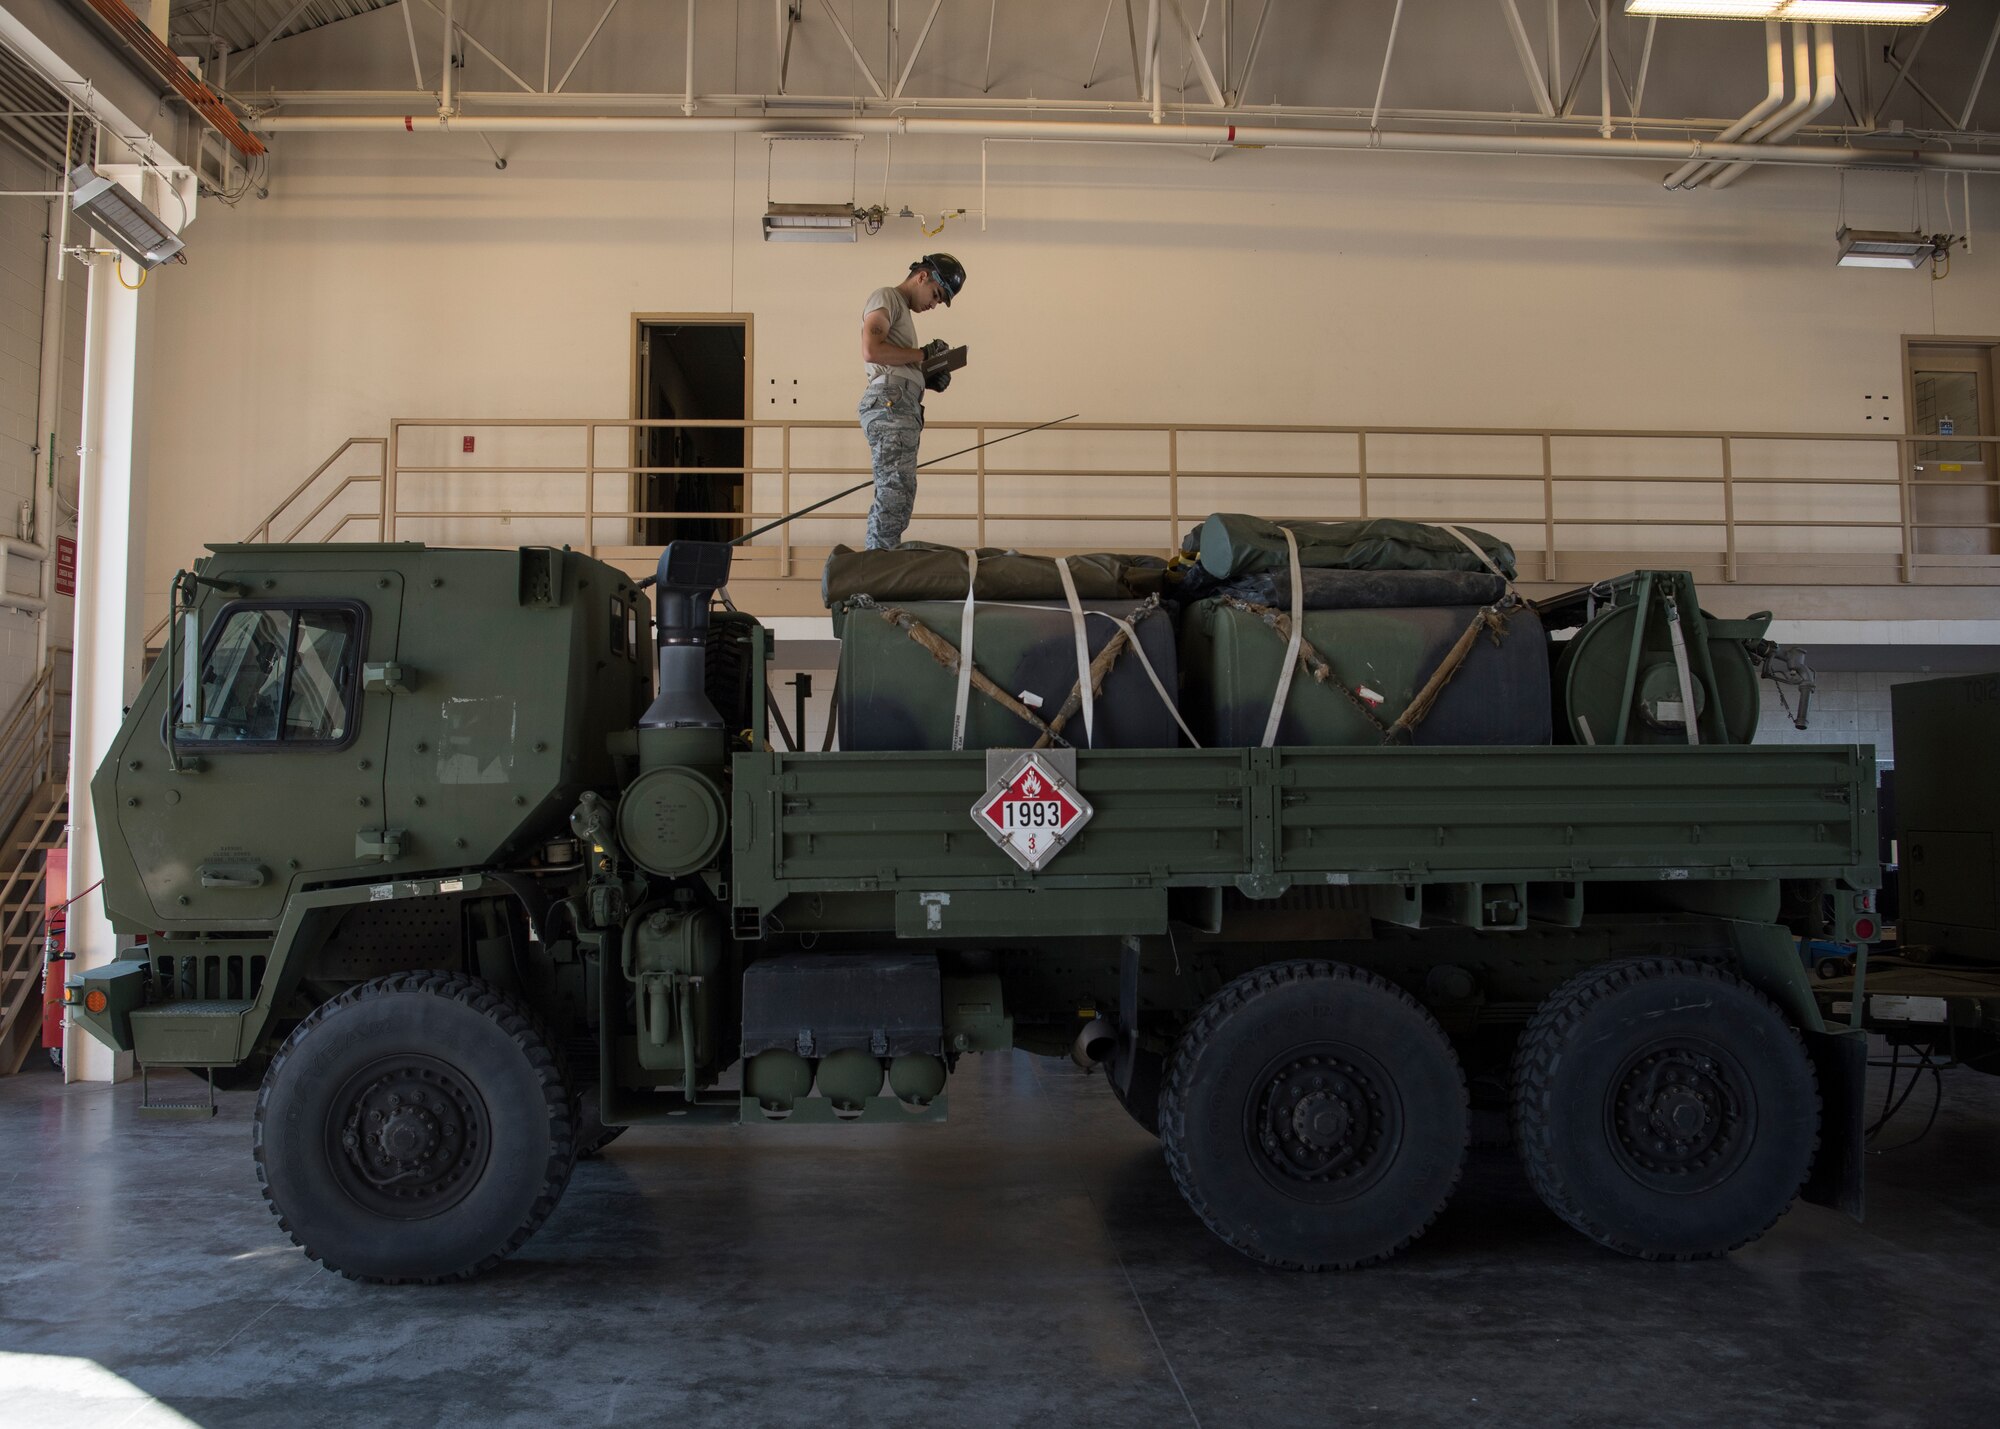 Airman 1st Class Everett Graham, 726th Air Control Squadron power production journeyman, takes inventory on a Medium Tactical Vehicle in preparation for an exercise July 9, 2019, at Mountain Home Air Force Base, Idaho. The 726th ACS Conducts deployment exercises in order to increase their mission readiness. (U.S. Air Force photo by Airman 1st Class Andrew Kobialka)